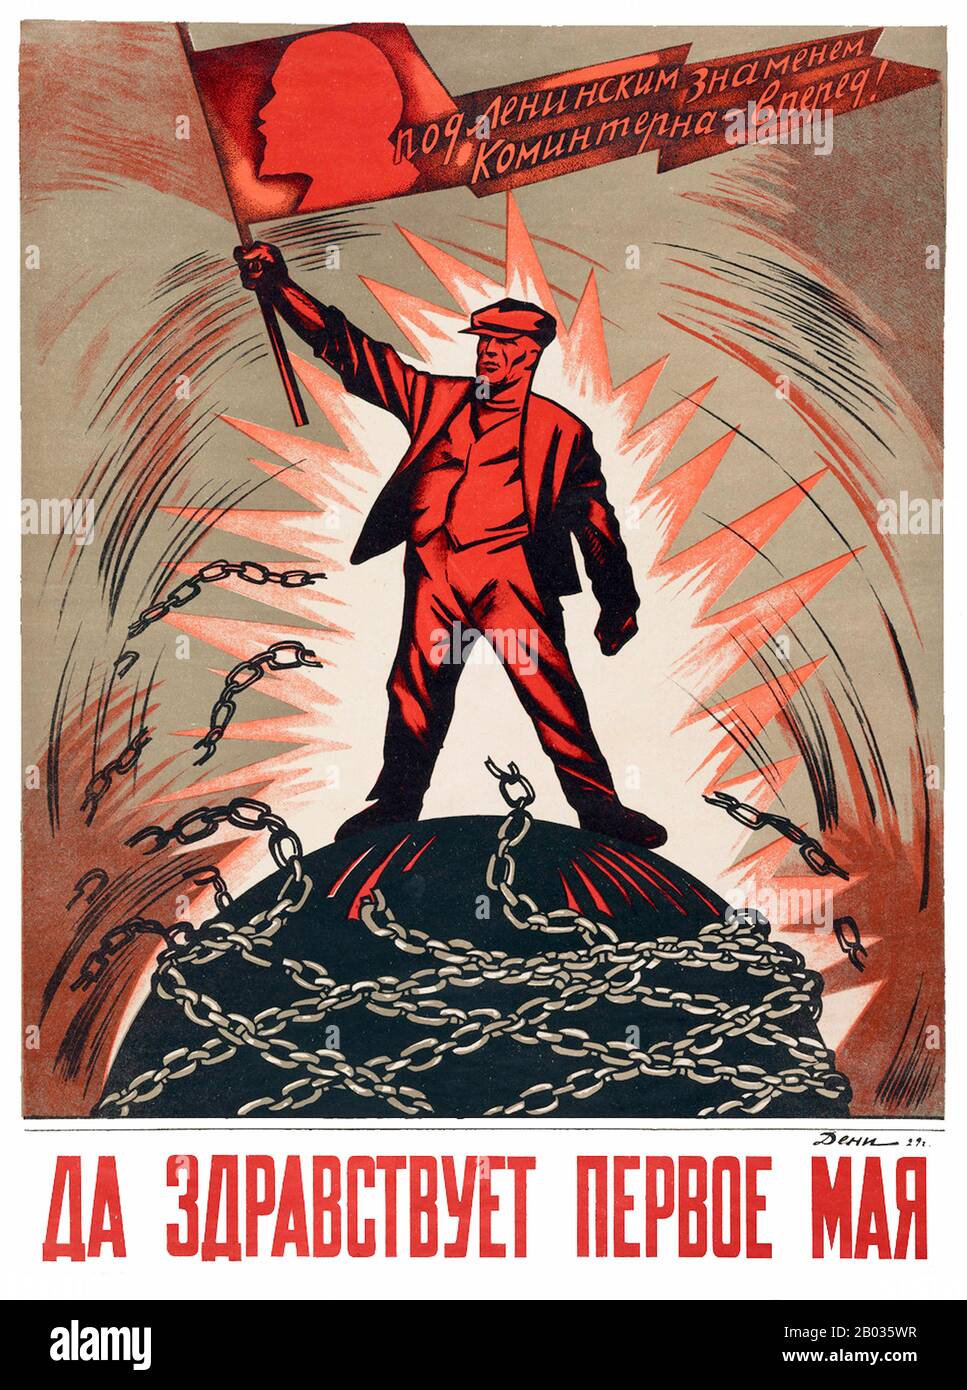 Communist propaganda in the Soviet Union was extensively based on Marxist-Leninist ideology to promote the Communist Party line.  Wall posters were widely used in the early days, often depicting the Red Army's triumphs for the benefit of the illiterate. This continued in World War II, still for the benefit of the less literate, with bold, simple designs. Stock Photo